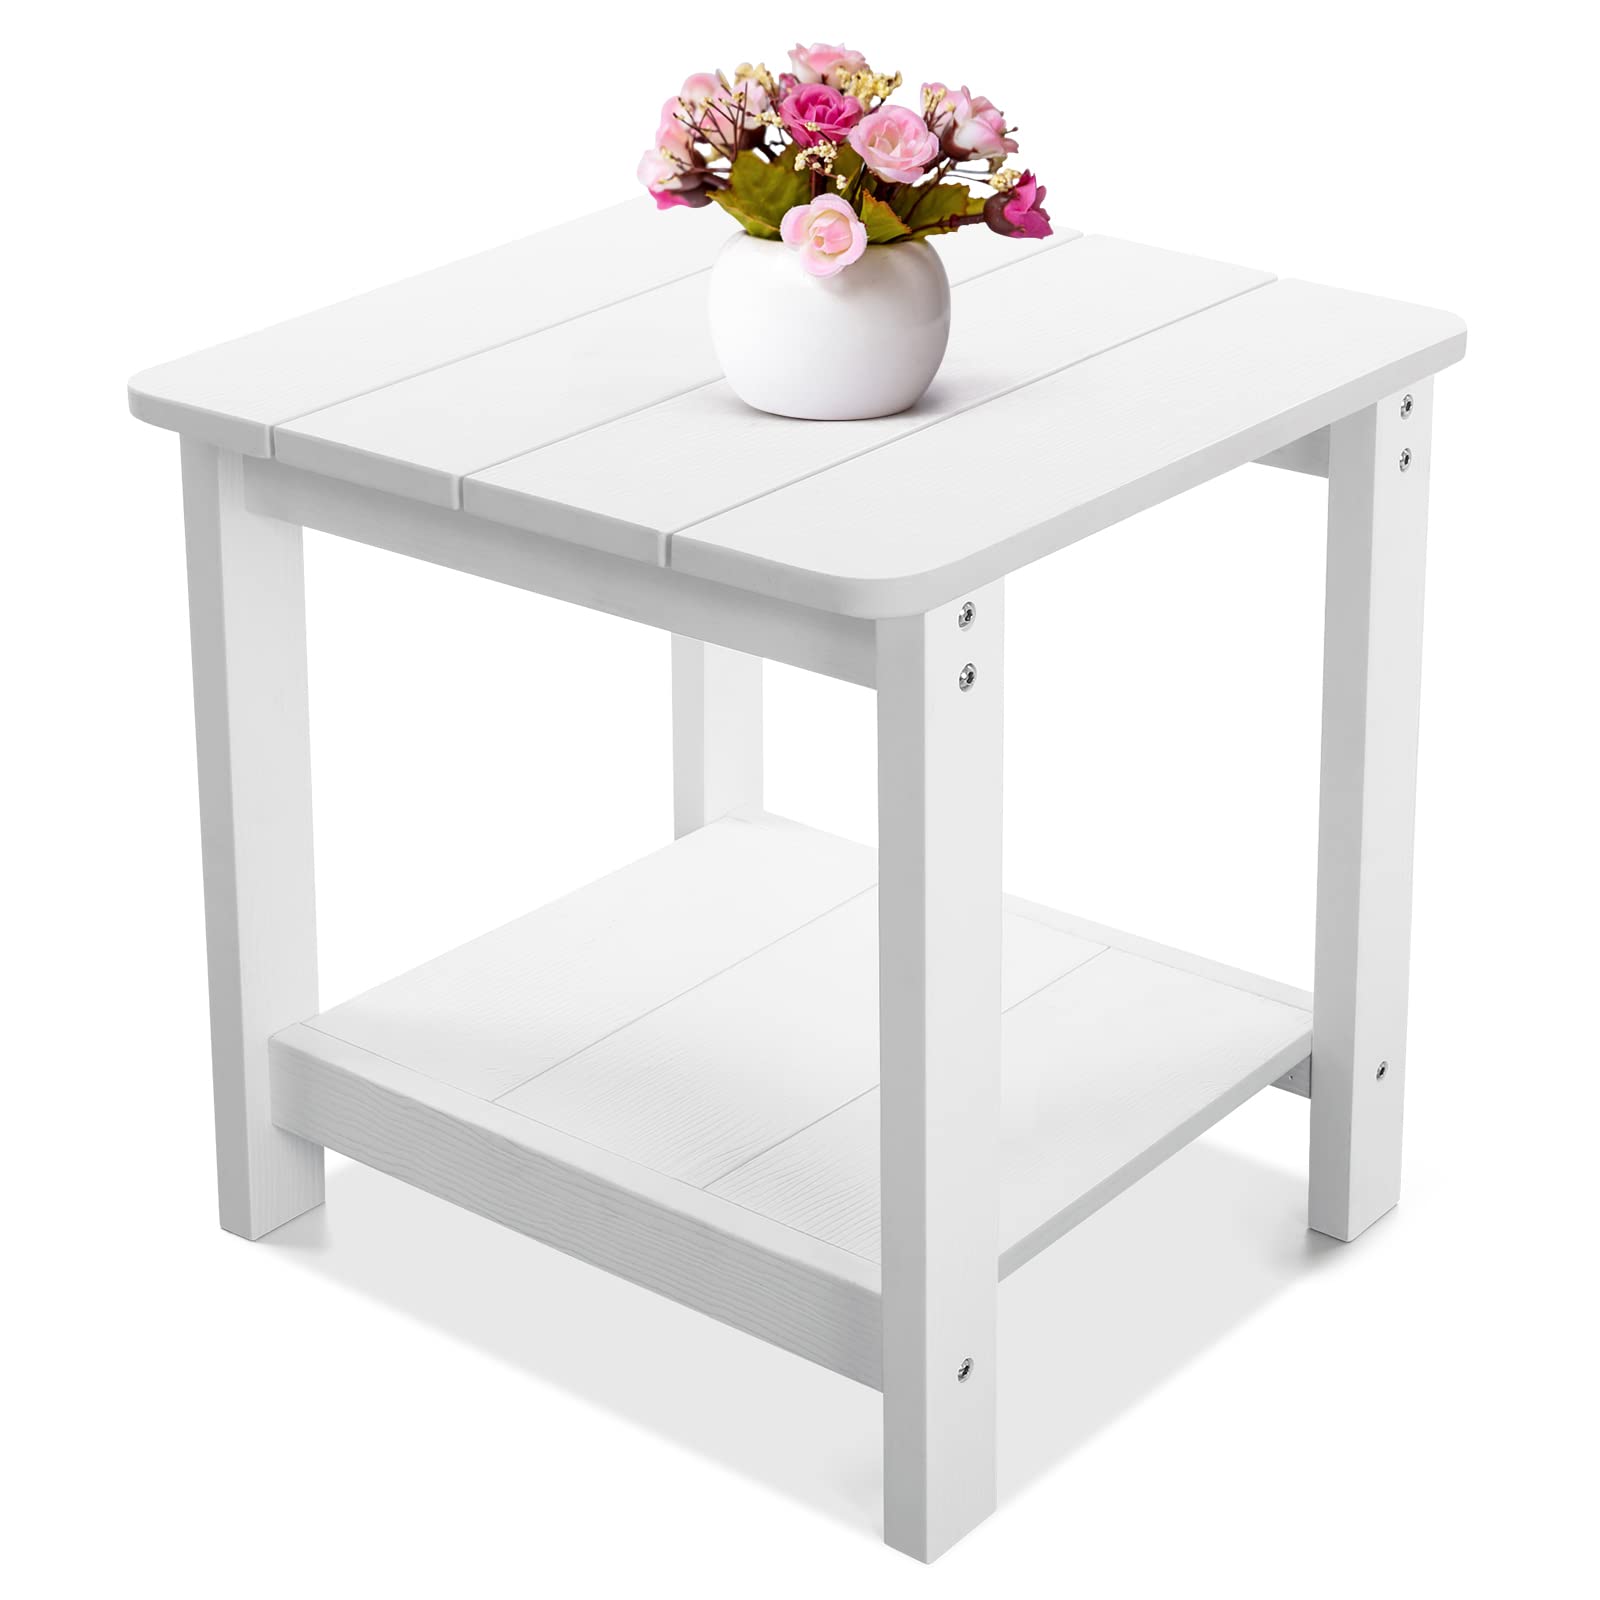 Outdoor Side Table, Weather Resistant 2-Tier Side Table, Hips Plastic End Table, Adirondack Side Table, Rocker Side Table for Backyard, Patio, Pool, Deck and Garden, White, 17 x 17x 17.5 inches - image 1 of 7